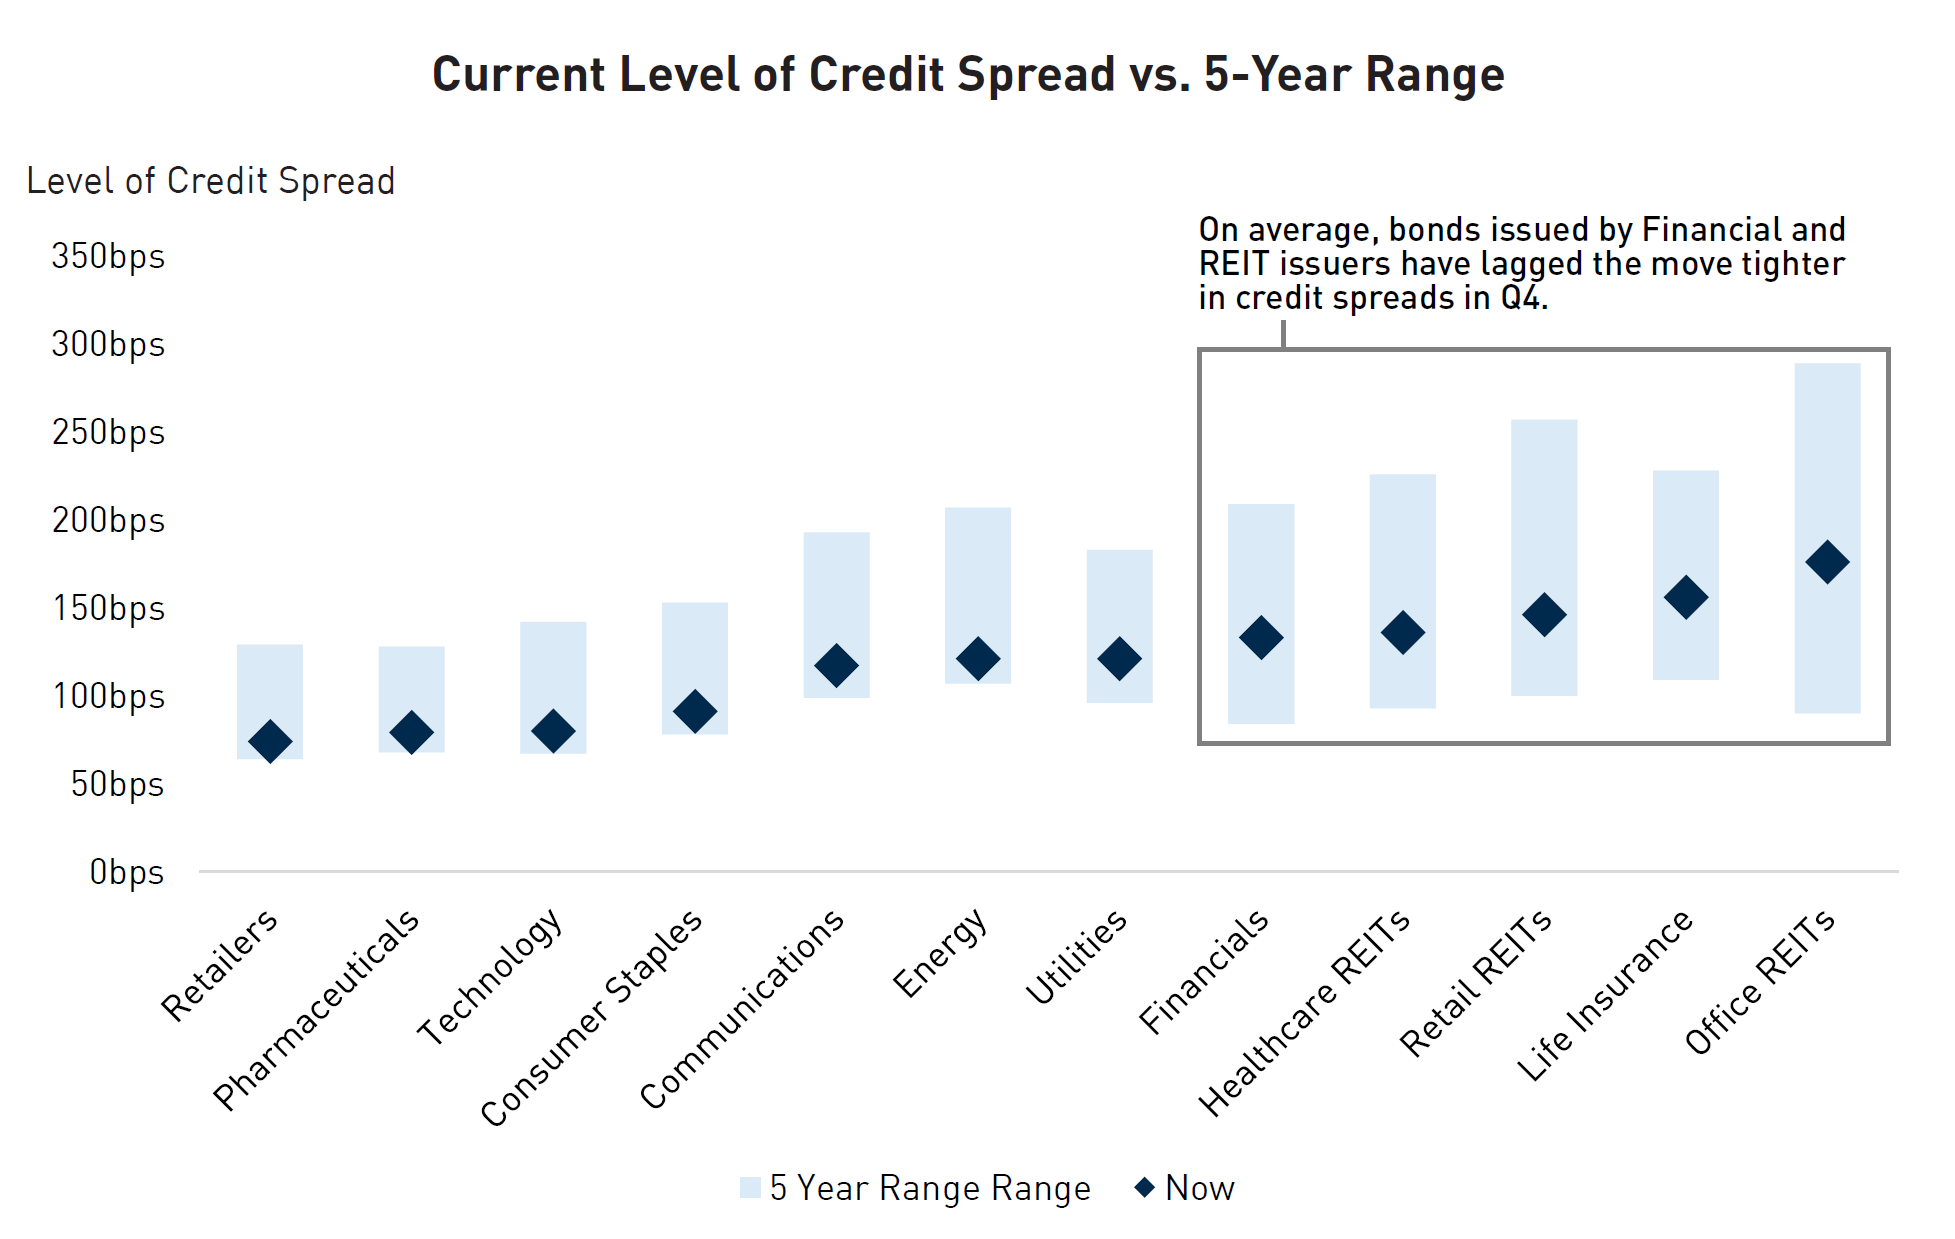 Chart showing current level of credit spread vs. 5-year range